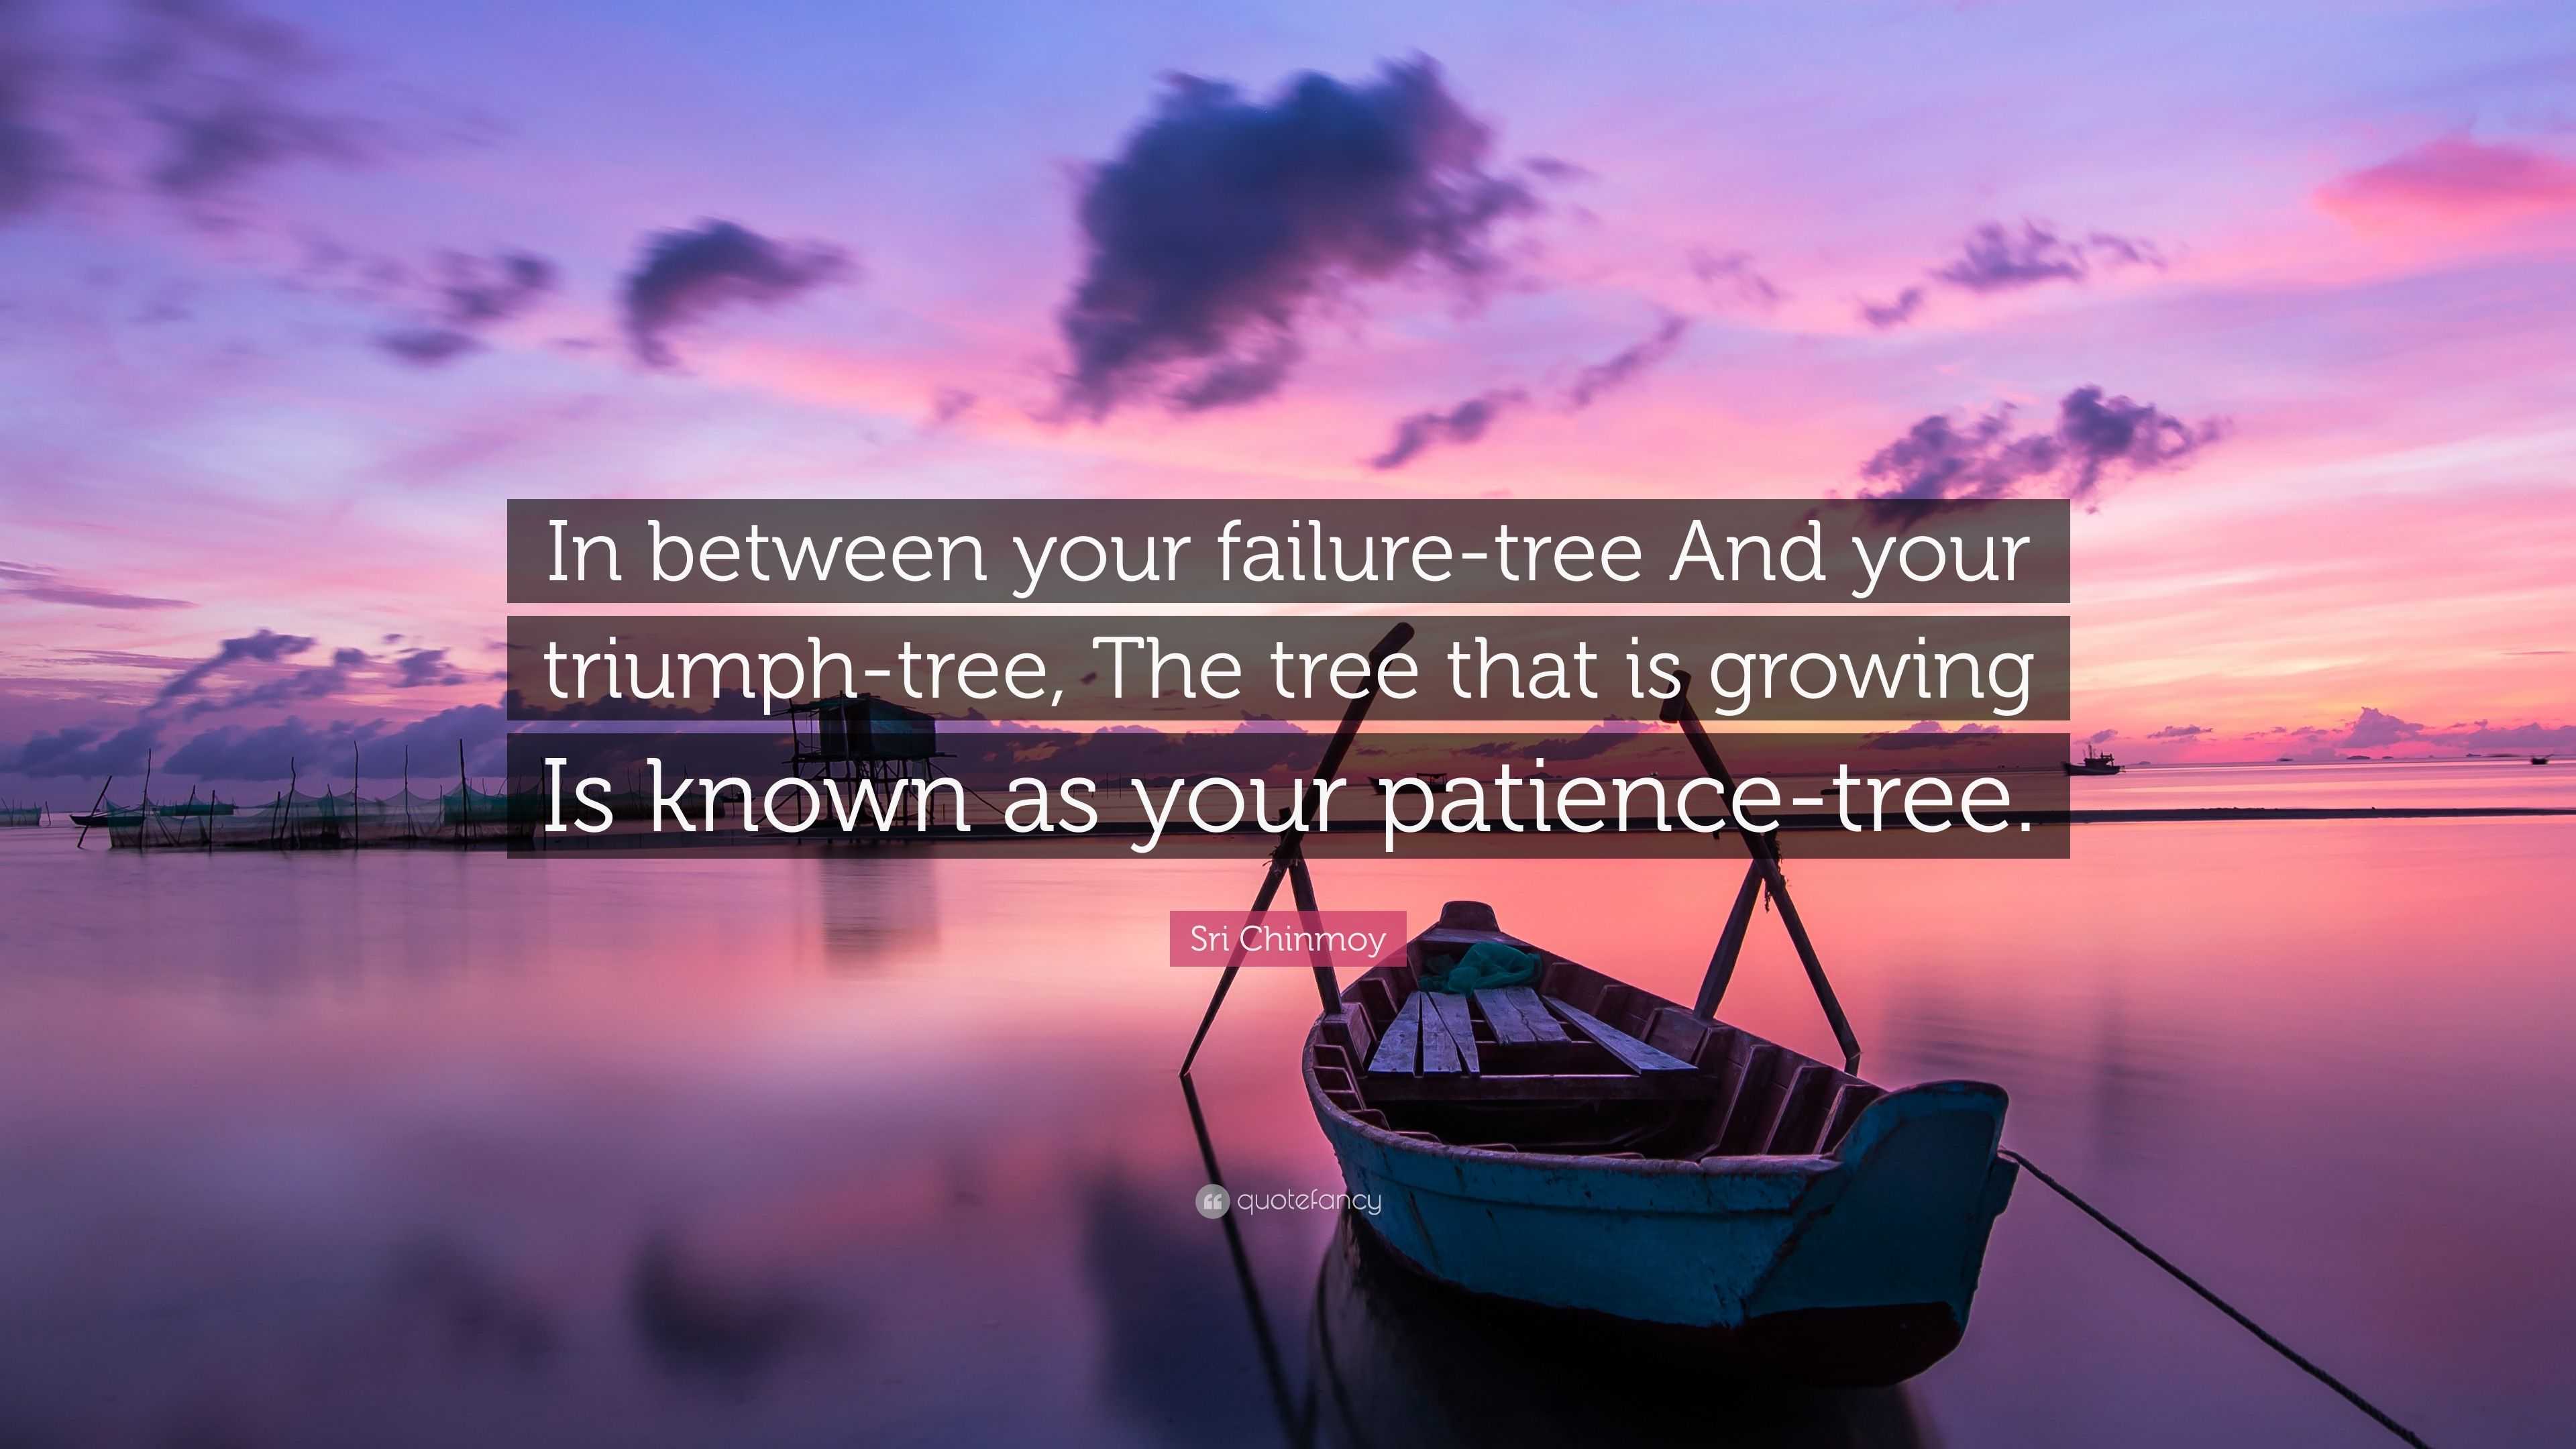 Sri Chinmoy Quote: “In between your failure-tree And your triumph-tree, The  tree that is